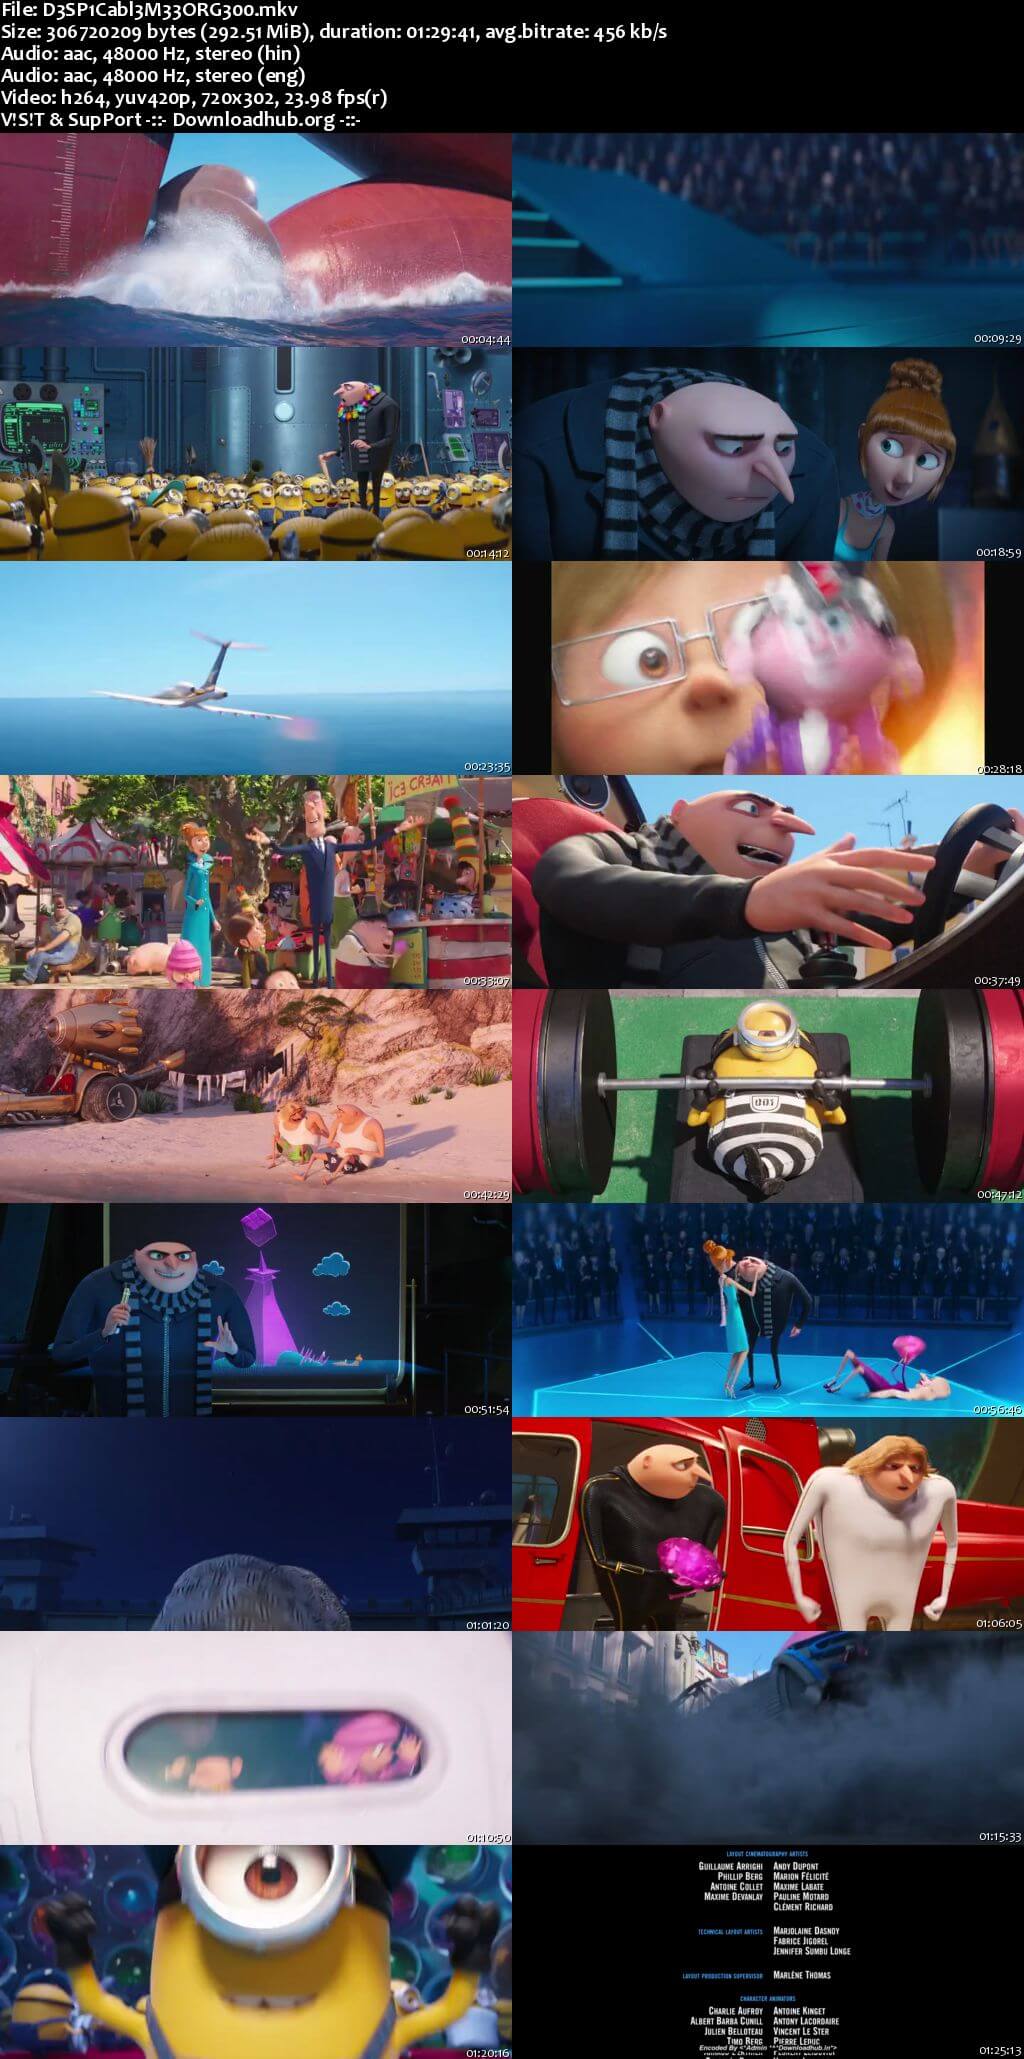 Despicable Me 3 for apple instal free